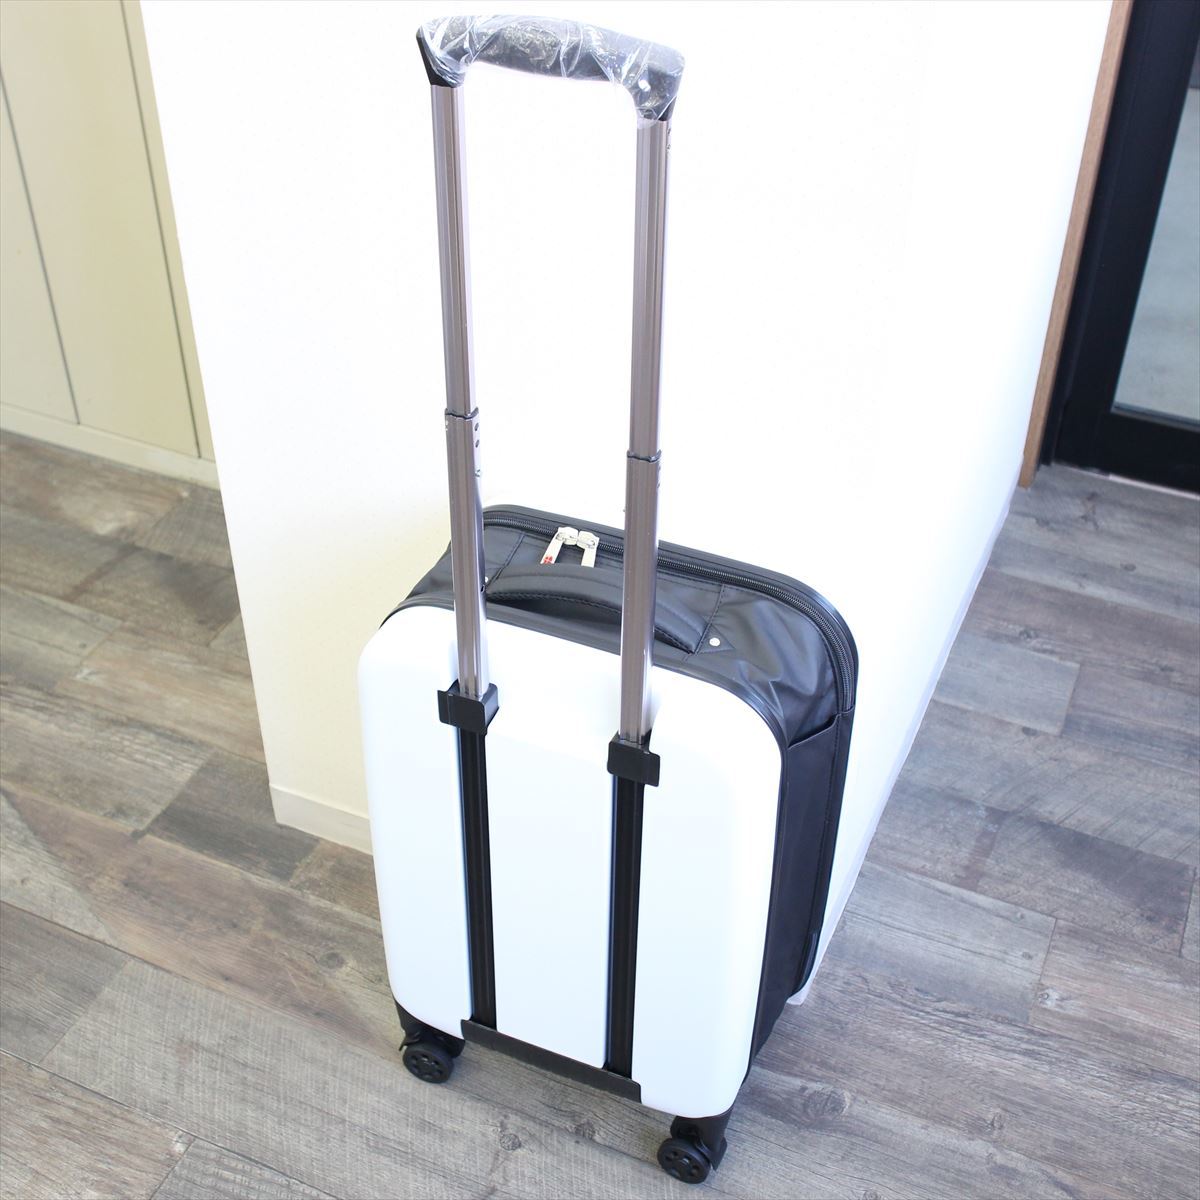  suitcase folding light weight thin type folding type Carry case travel business 1.2 day PC bag machine inside bringing in possibility white 03